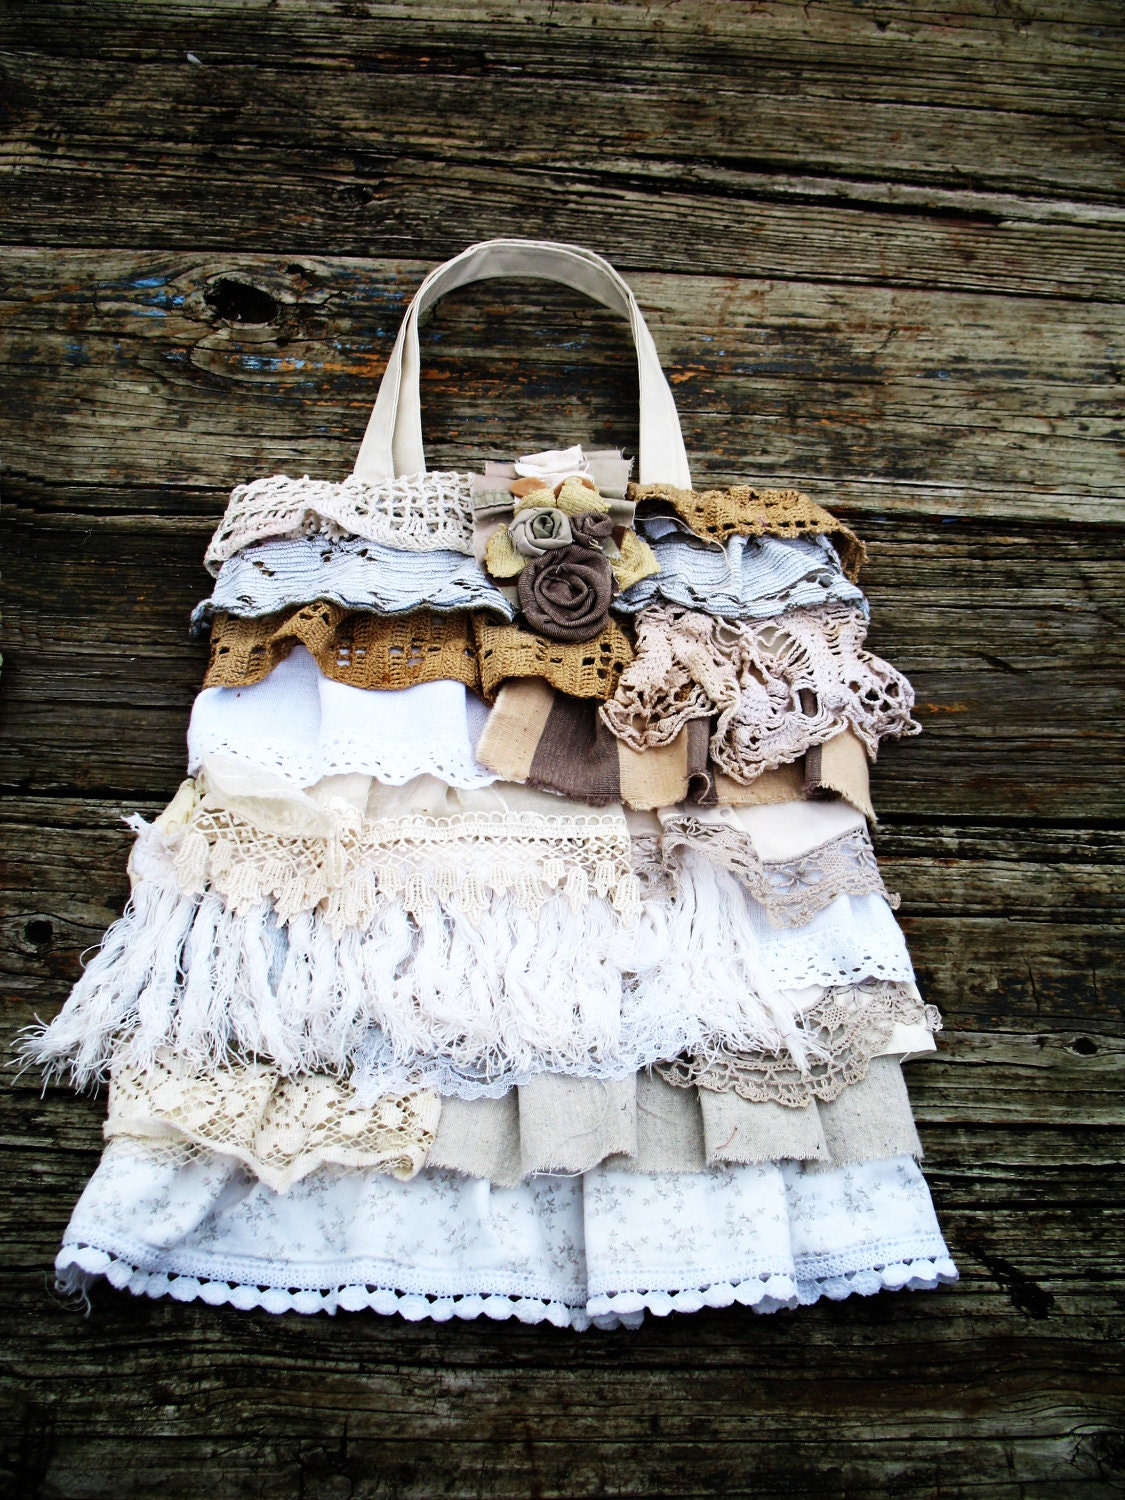 Ruffles and Lace Upcycled Tote Bag Purse in Neutral Tones